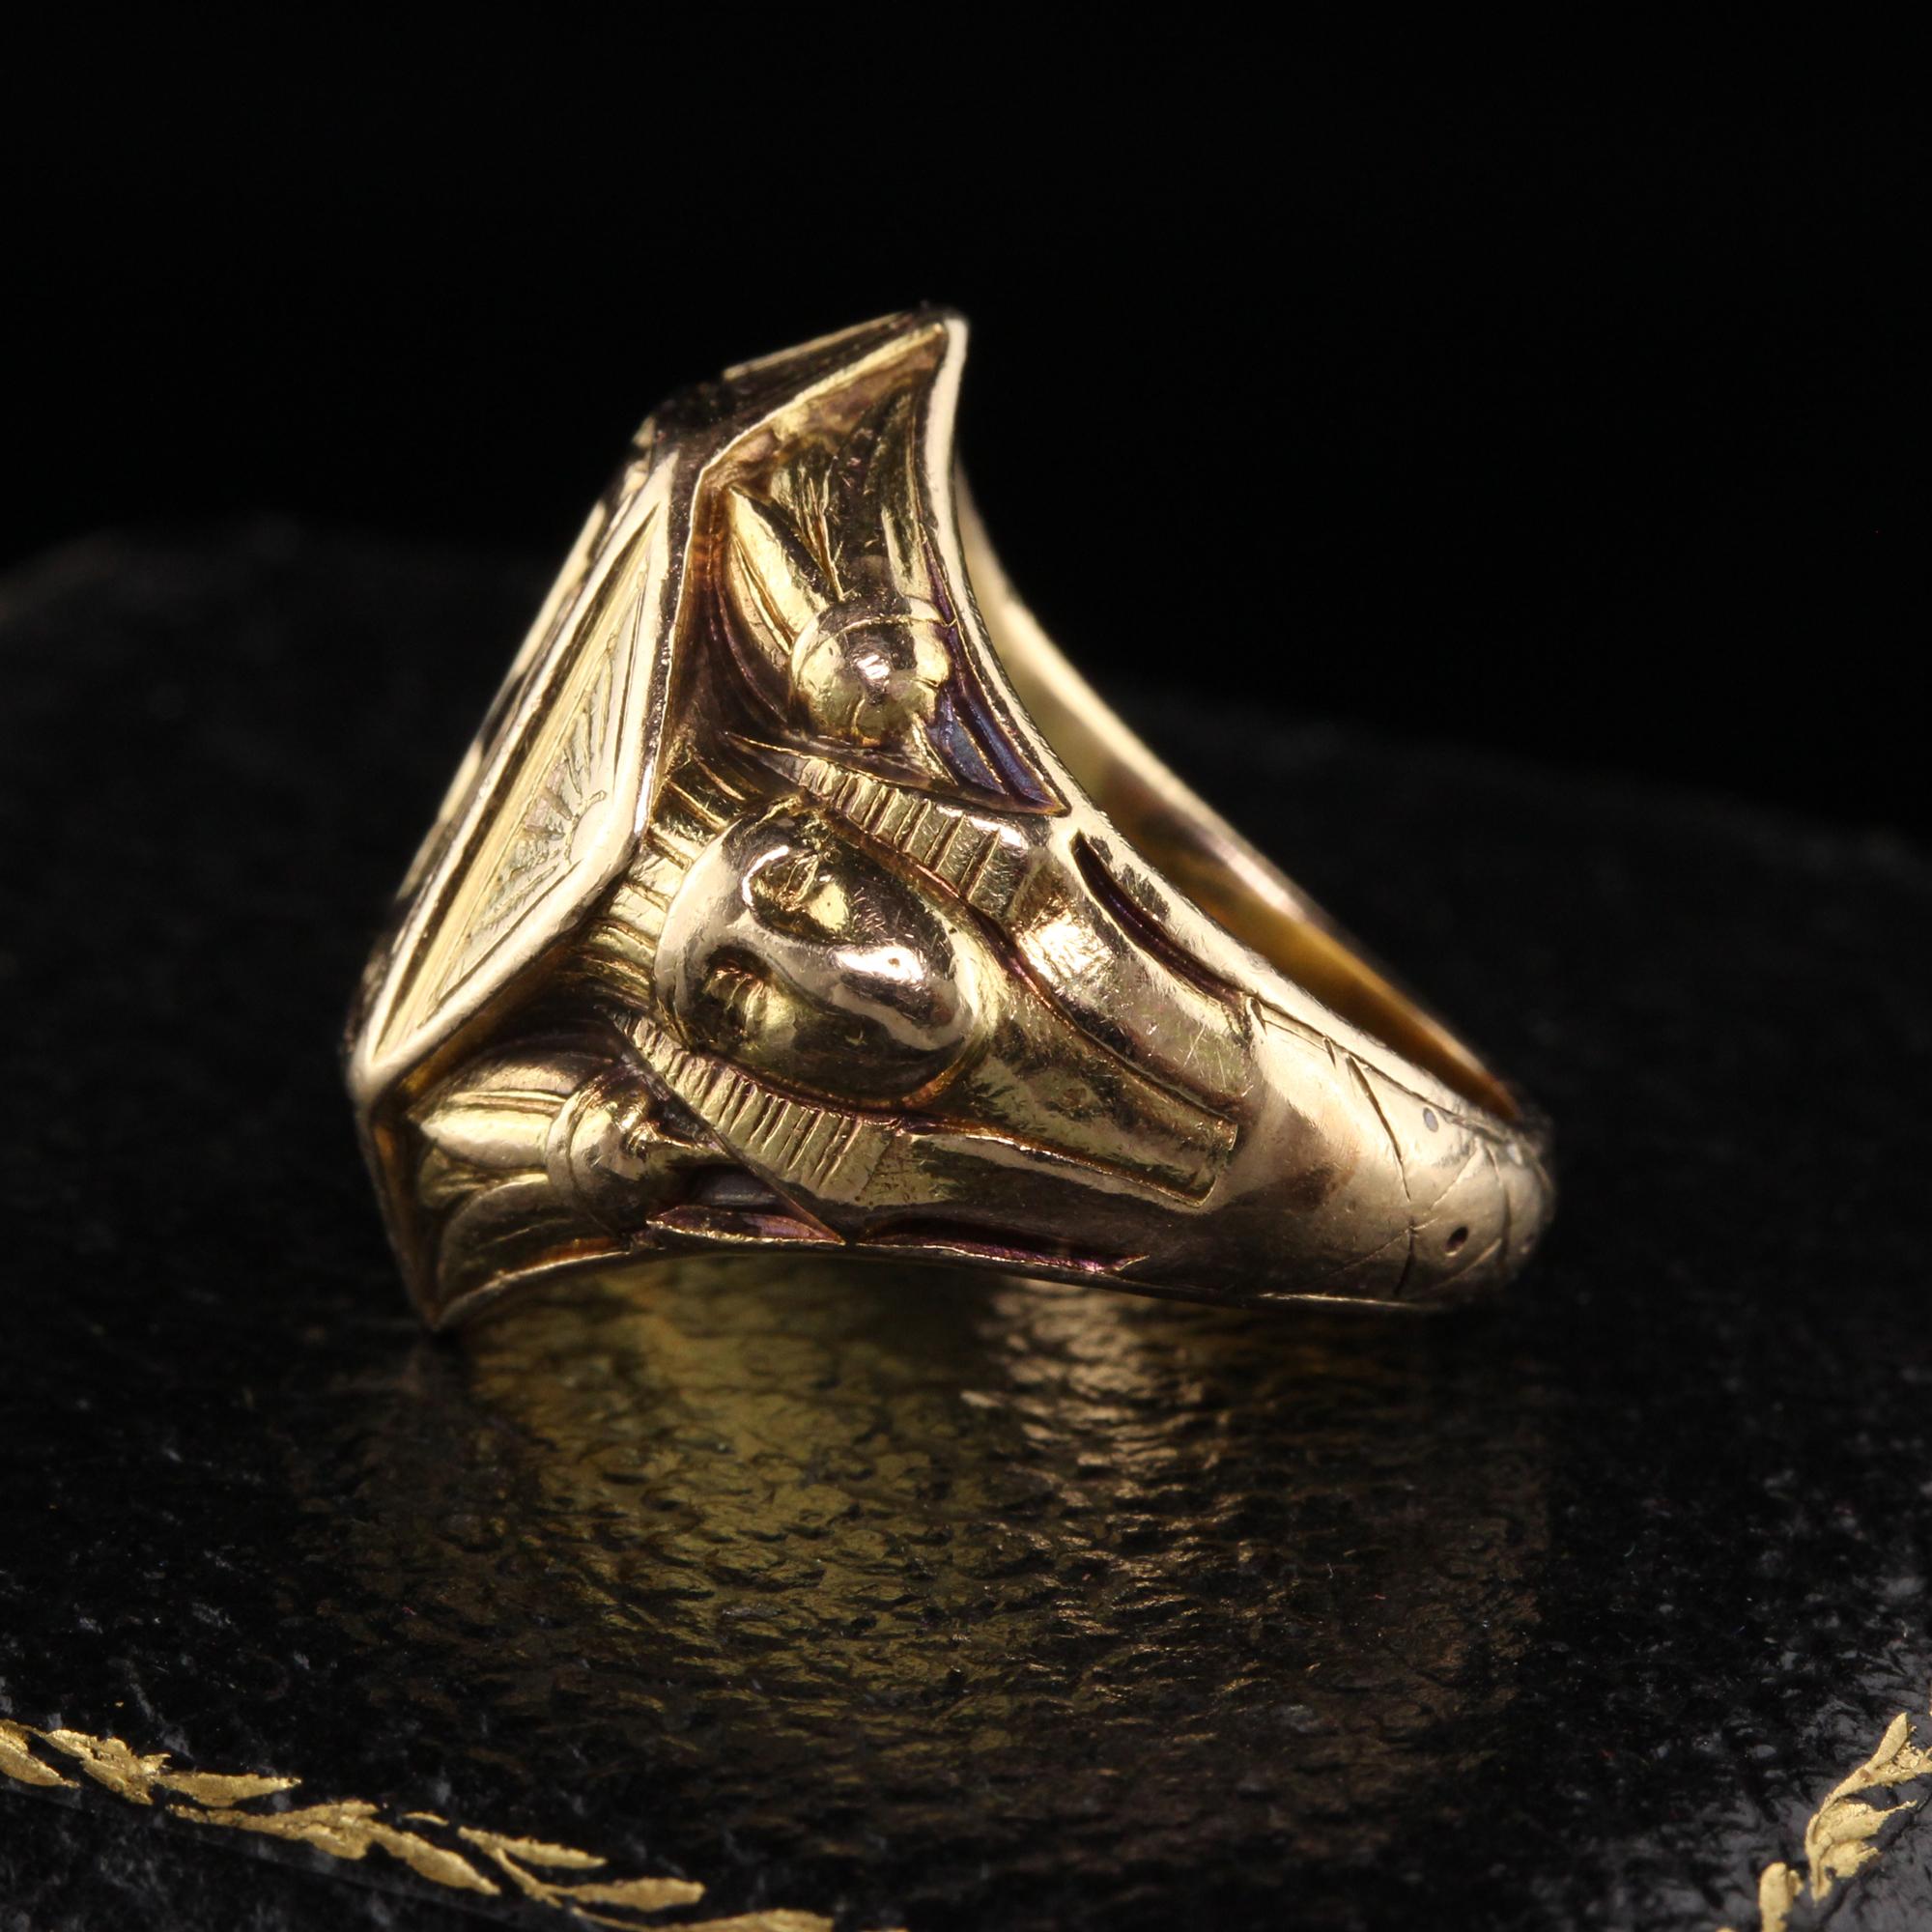 Beautiful Antique Art Deco Bailey Banks and Biddle Egyptian Revival 14K Gold Signet Ring. This amazing egyptian revival ring has the letter K in the center with nicely visible and deep egyptian character engravings on each side. The ring is also